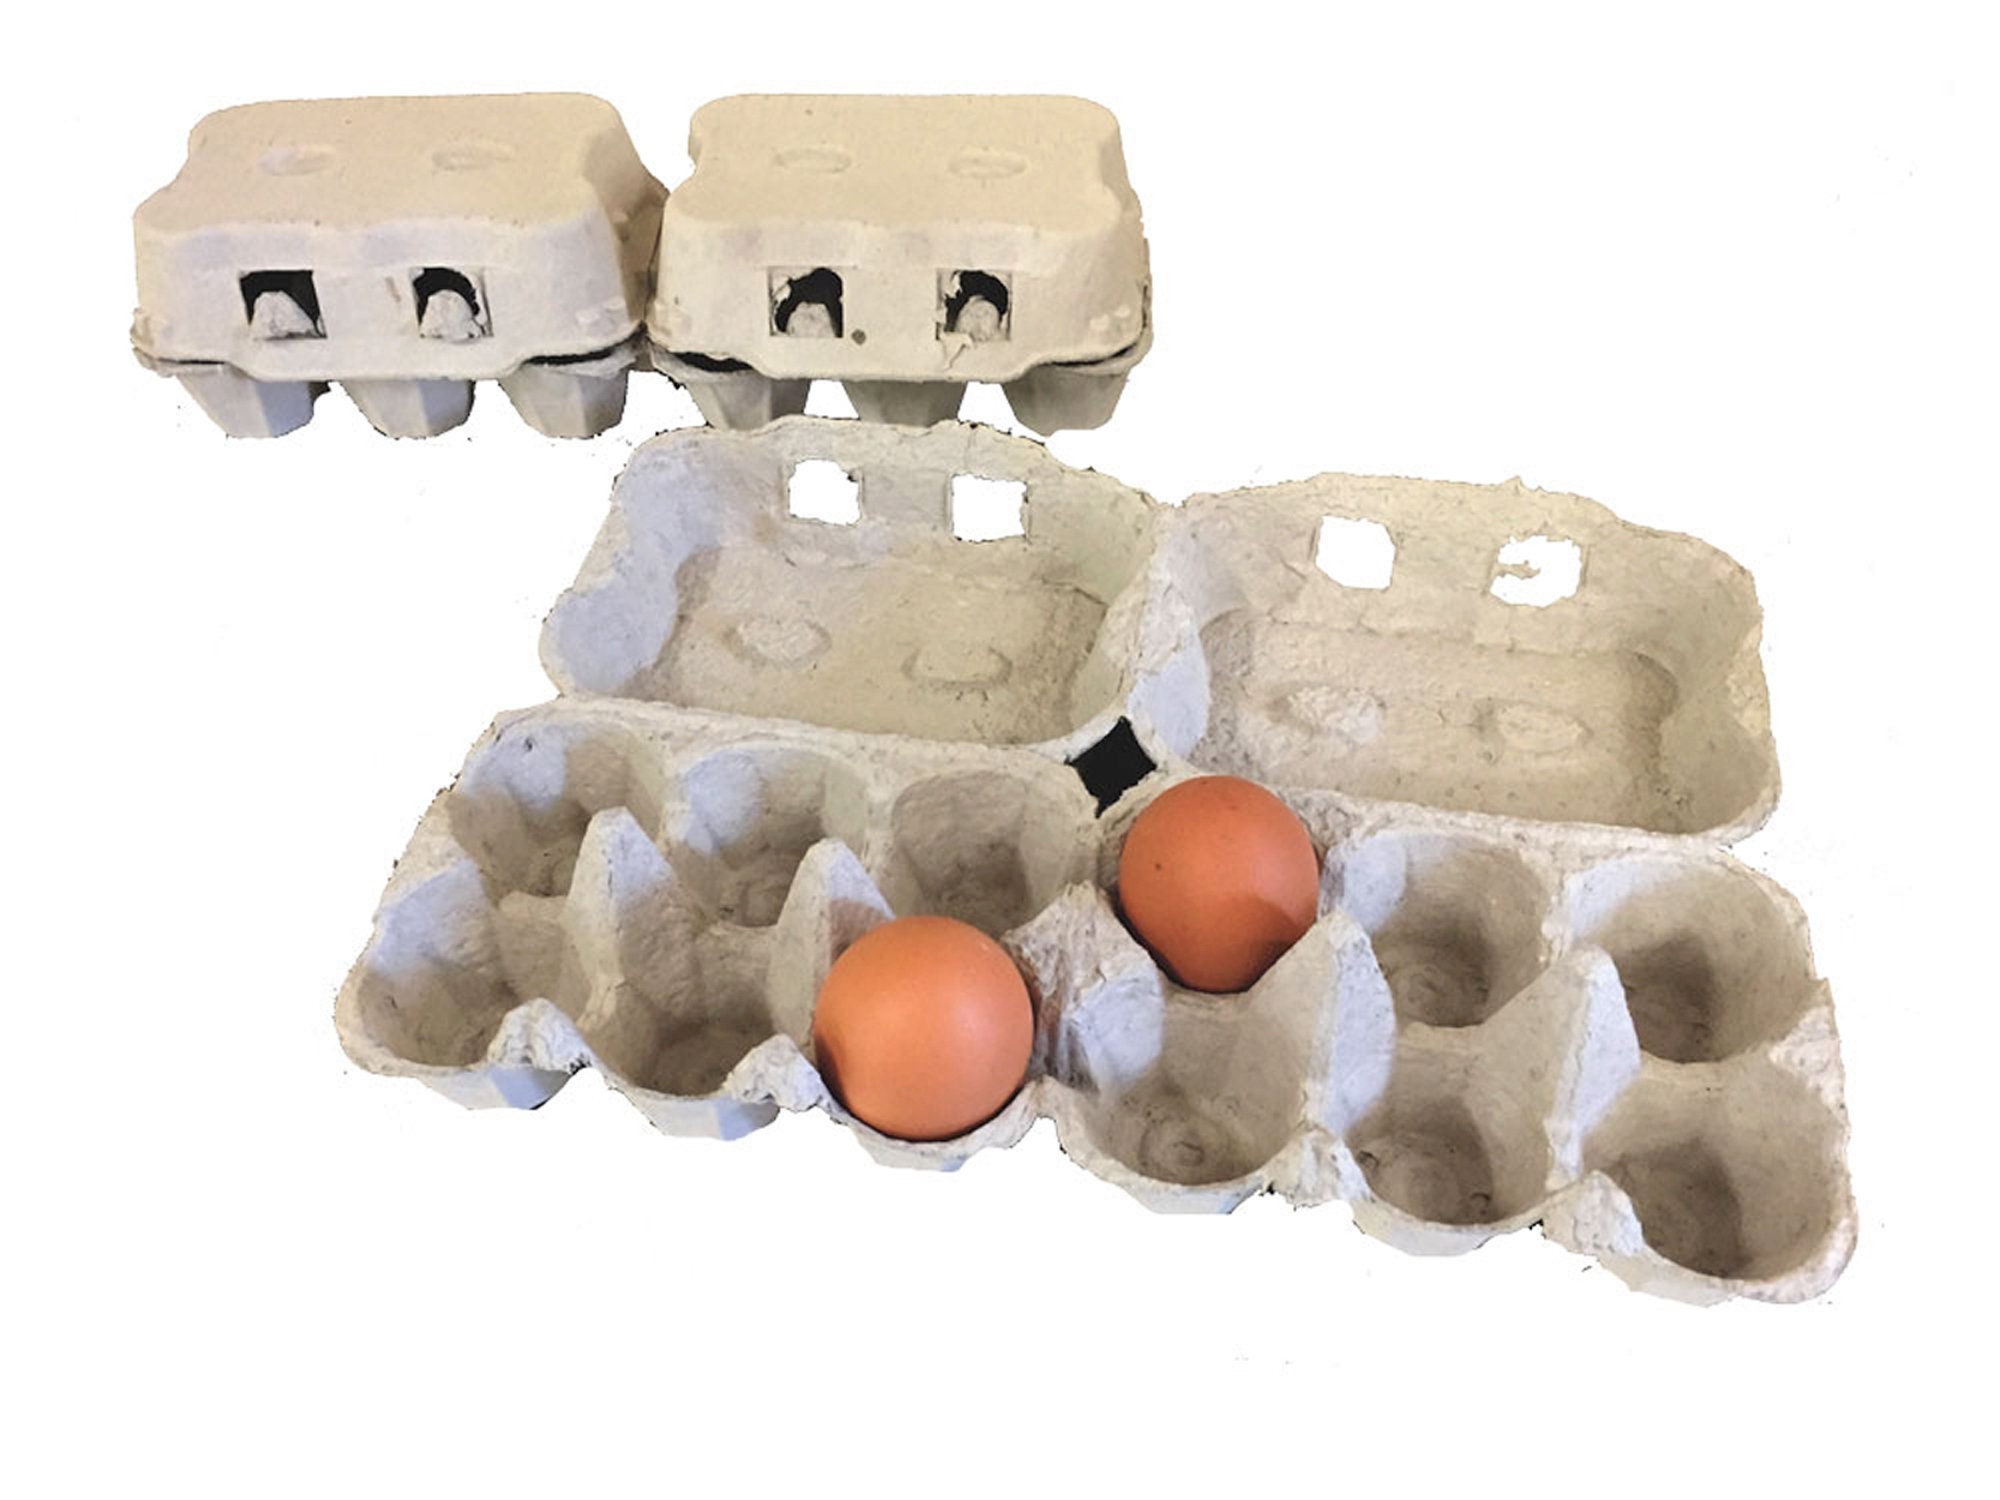  Egg Carton for Large Eggs with Sticker Labels, Each one hold 6  Eggs-60 Packs , Plastic Egg Carton for half dozen Eggs, for Refrigerator,  Storage, Family, Chicken Farm, Market, Camping, Picnic